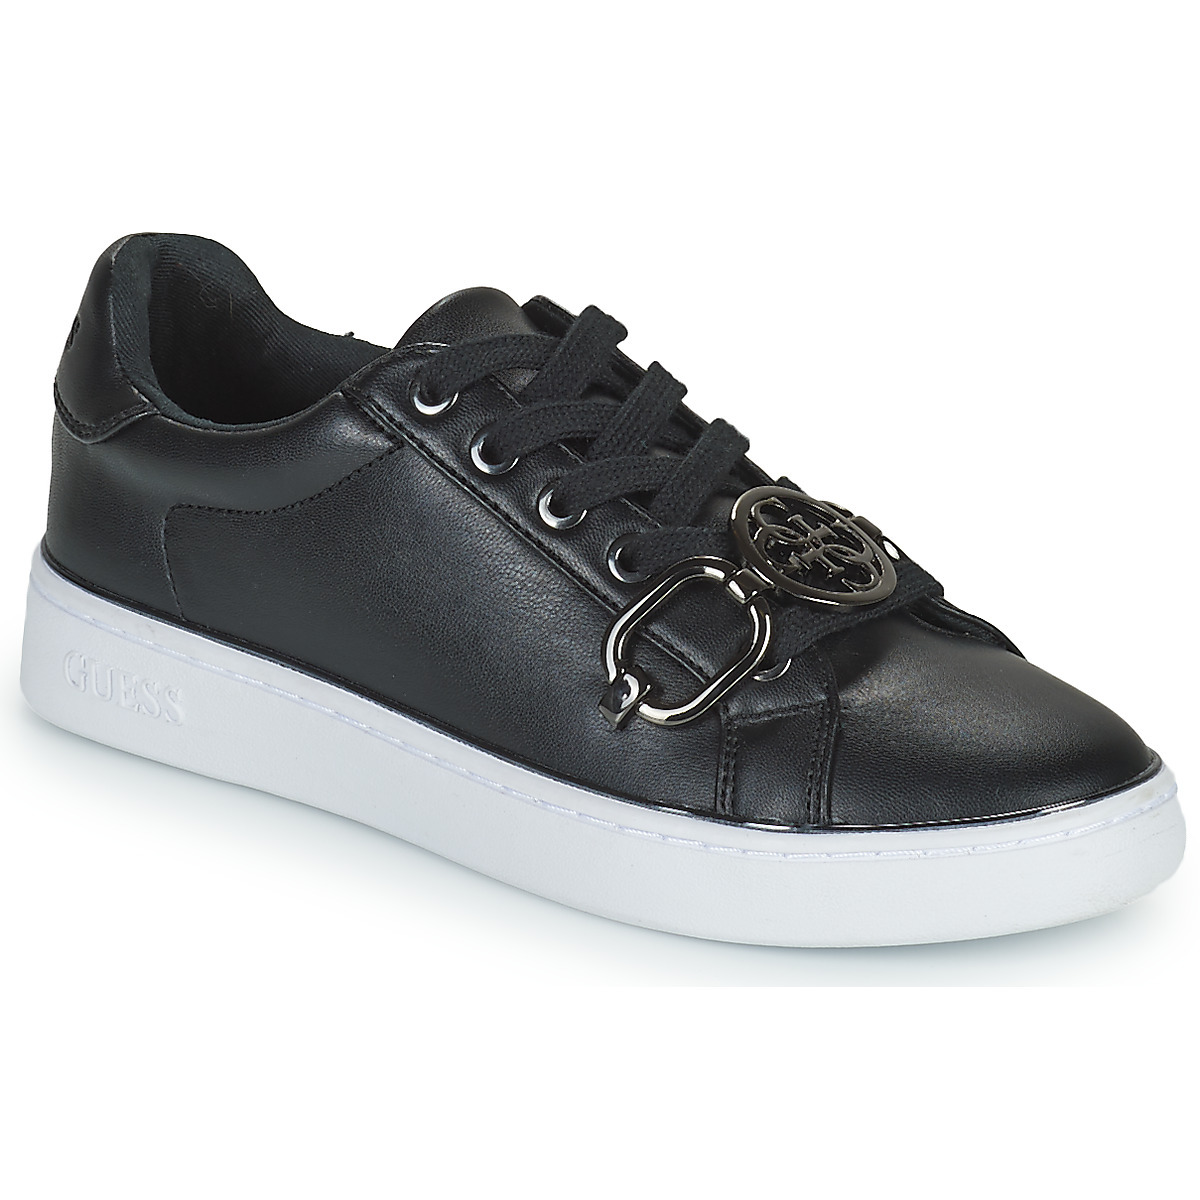 Spartoo - Ladies Sneakers Black from Guess GOOFASH